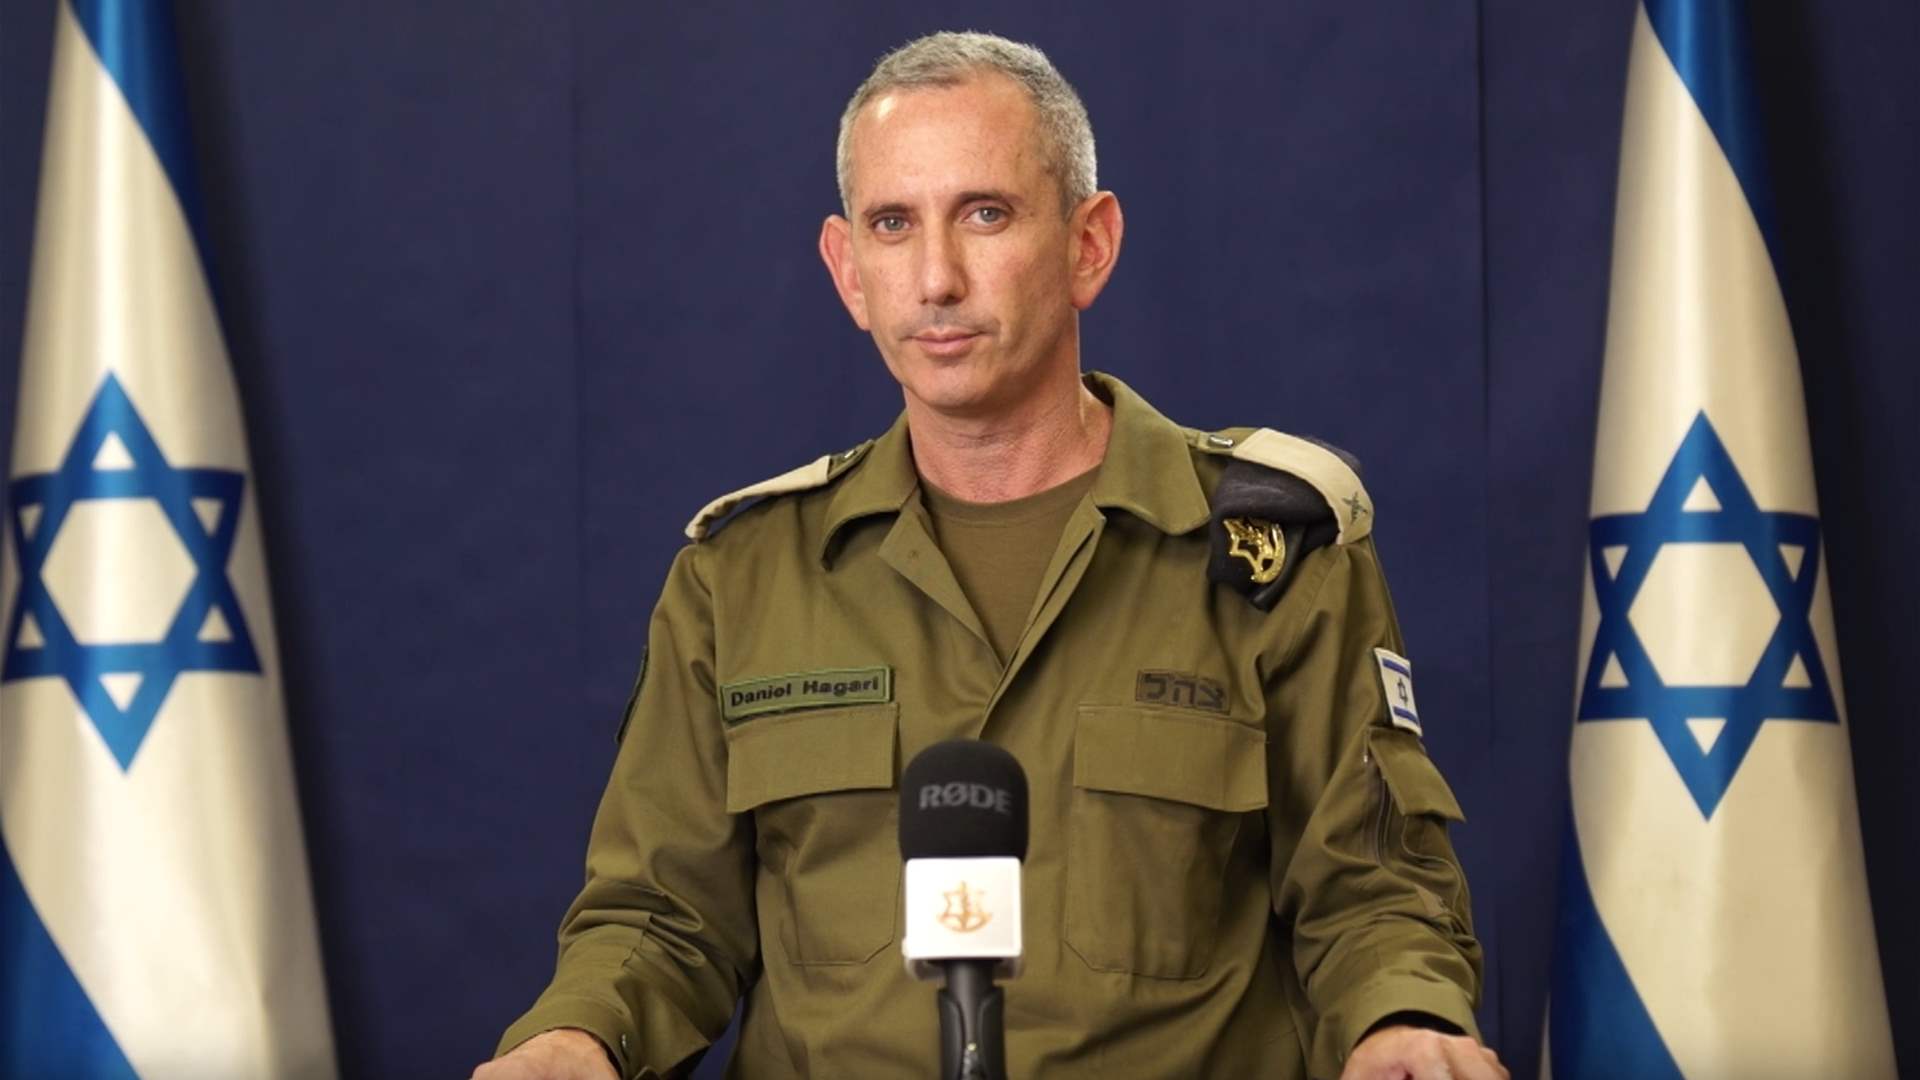 Israeli military spokesperson: Israel will continue to adhere to the terms of the prisoner exchange deal with Hamas